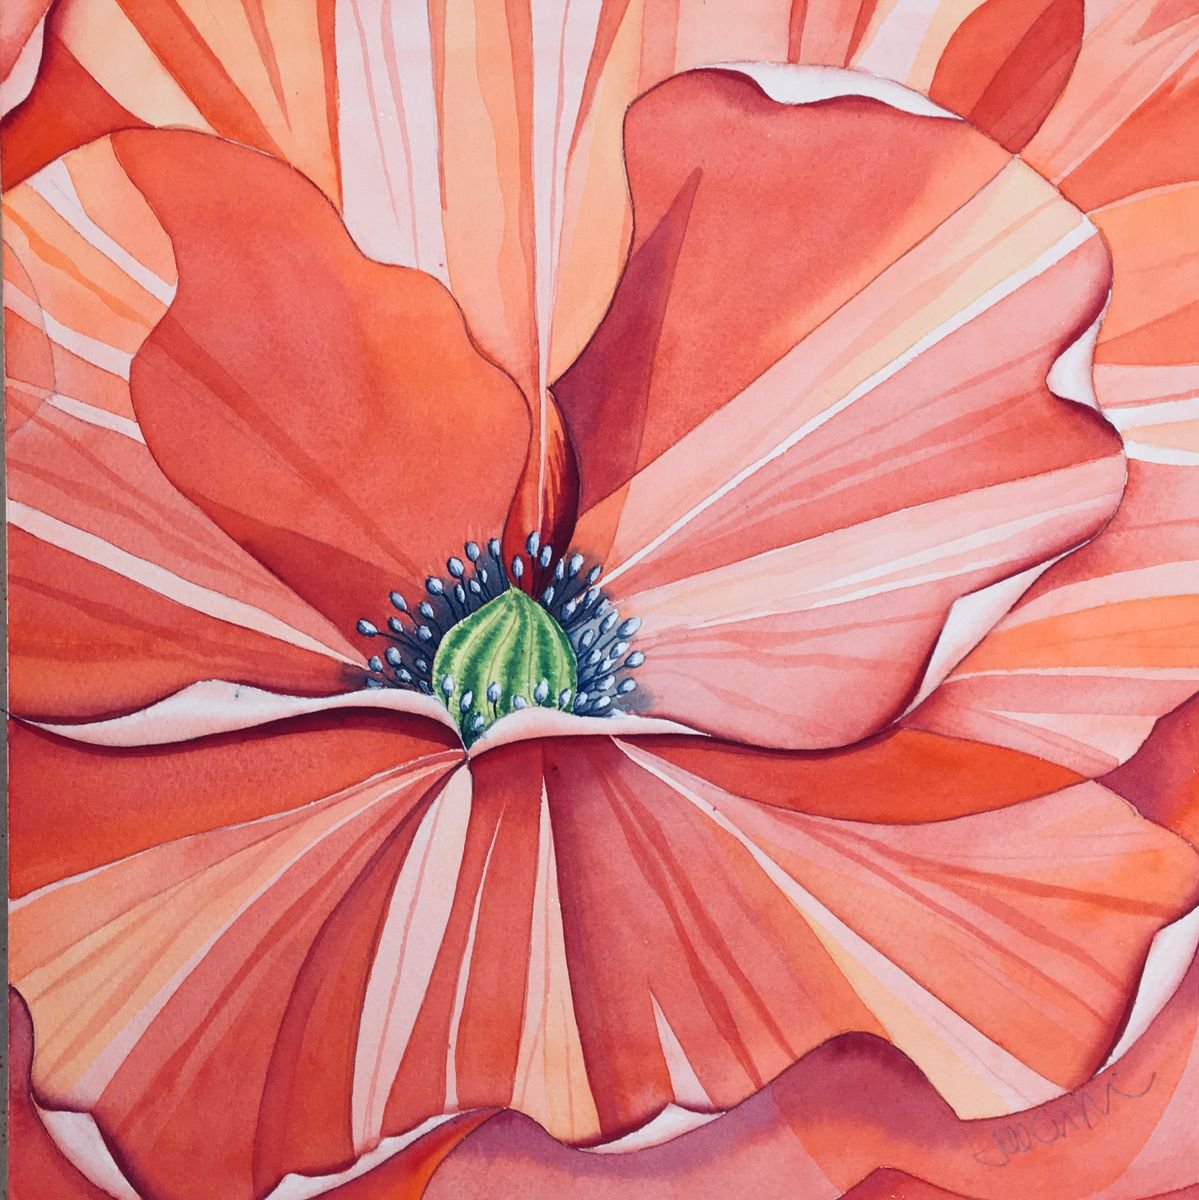 Fever- The heART of a Flower II by Jill Griffin